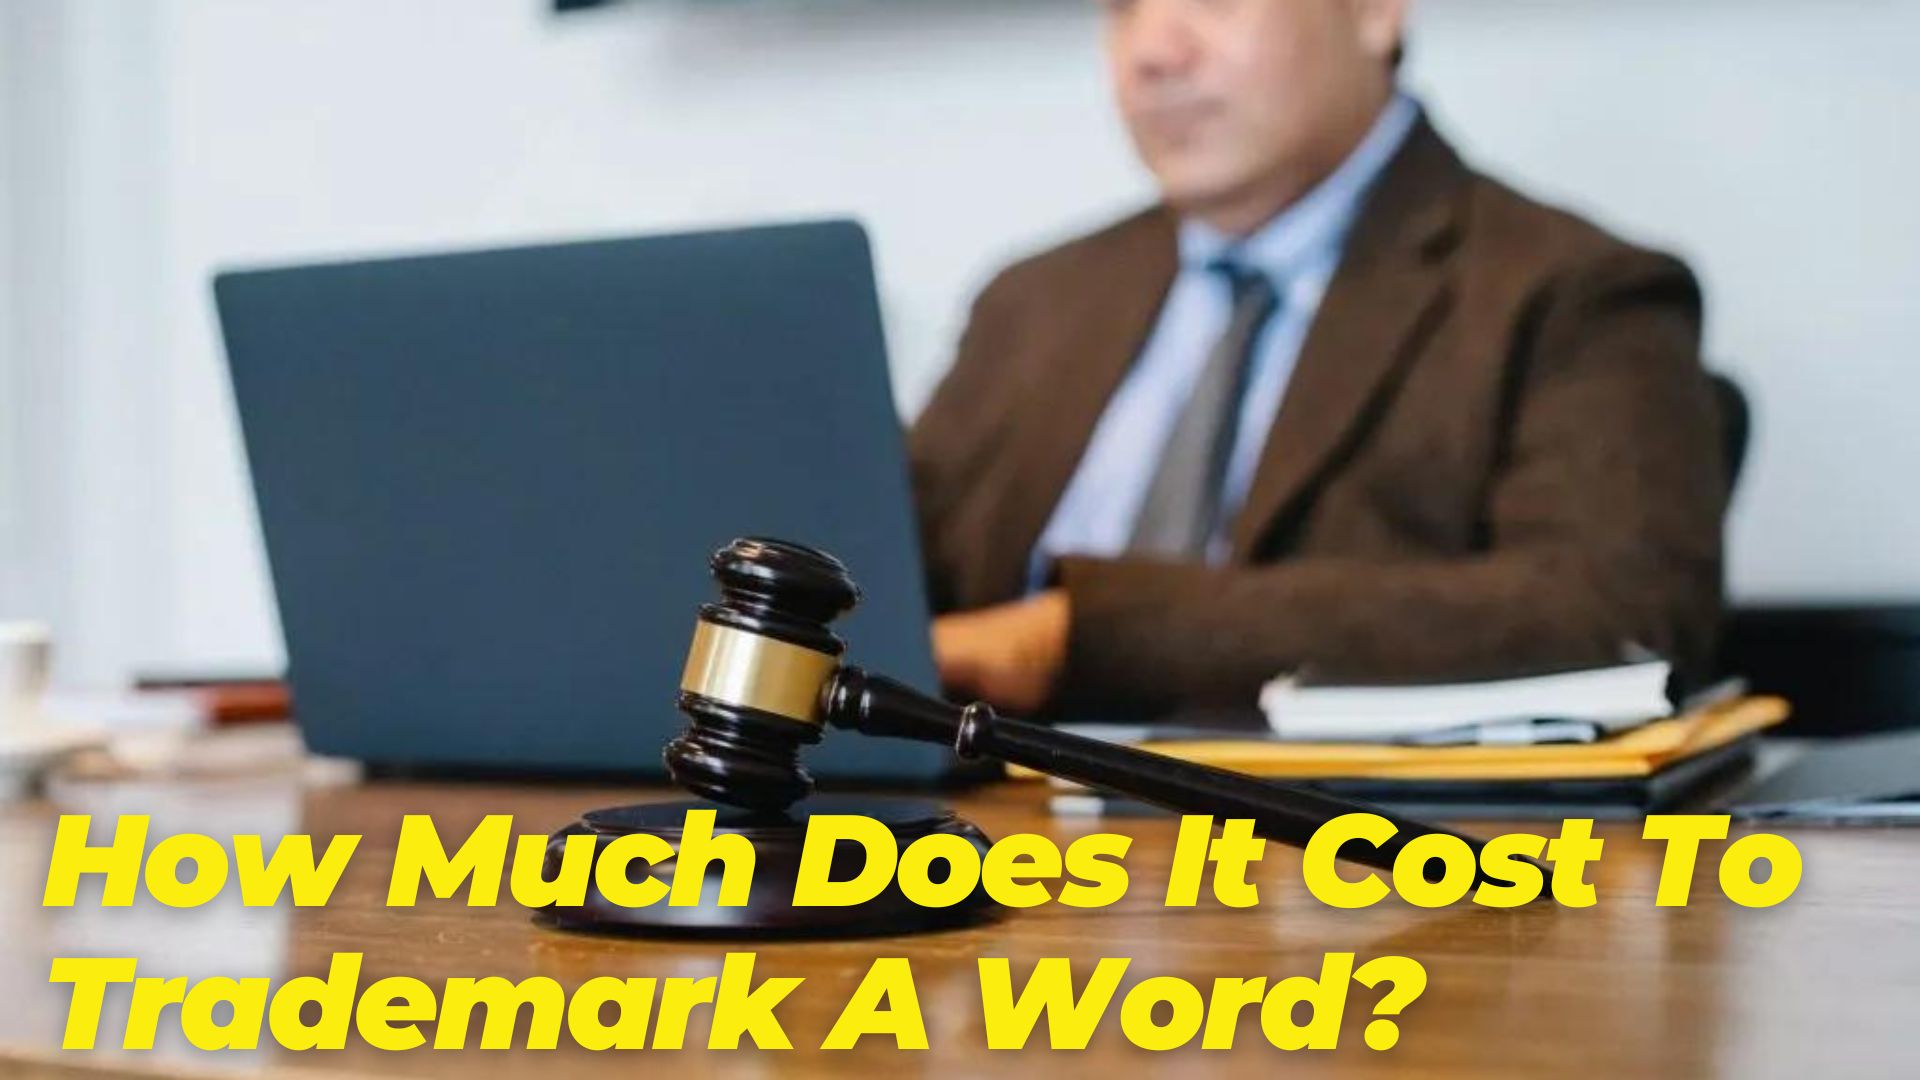 How Much Does It Cost To Trademark A Word?